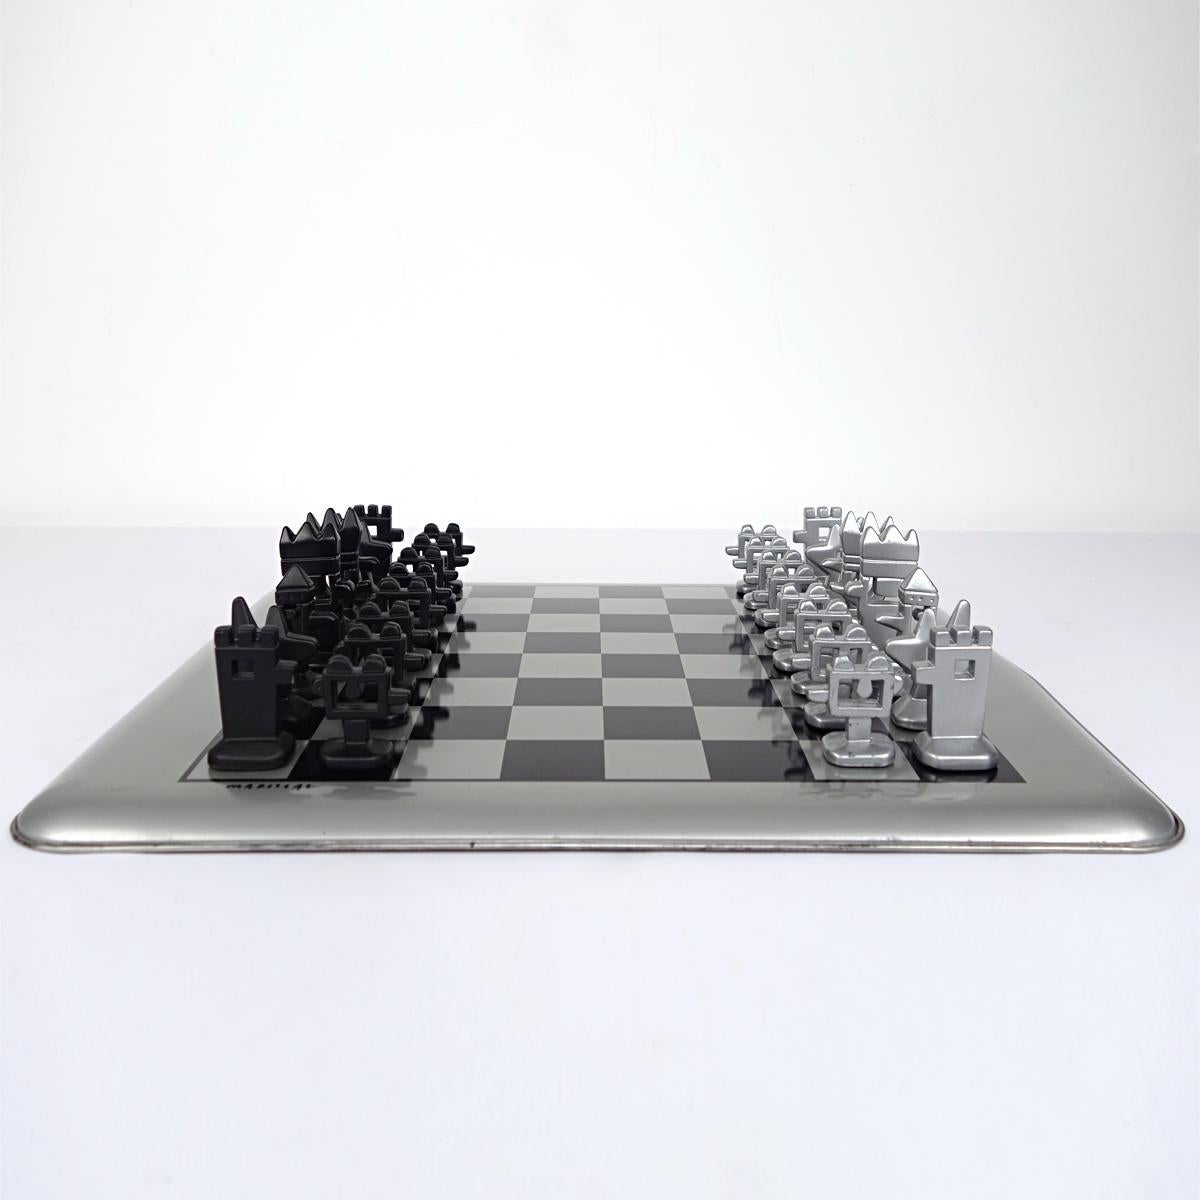 Chess figures and board designed by Javier Mariscal on the occasion of the Olympic Games of Barcelona 92. Aluminium parts and metal board. 

Measures: Height of the king: 6 cm. Pawn height: 3 cm. 

Javier Mariscal is a Valencian artist and